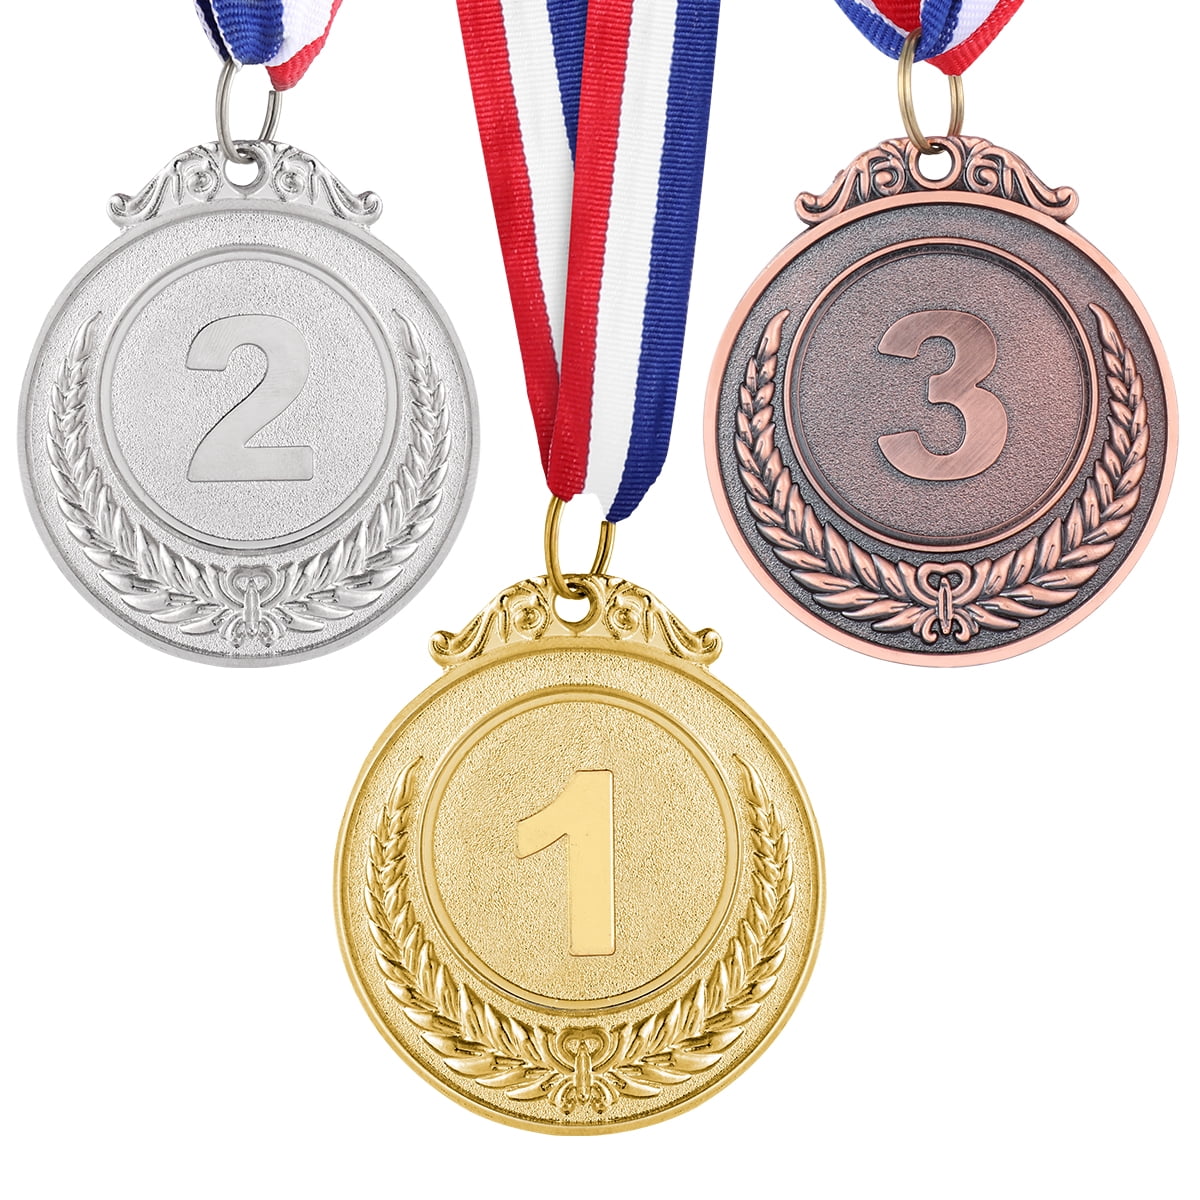 DANCE MEDALS 50mm PACK GOLD SILVER & BRONZE FREE RIBBONS DI5000.R.01 